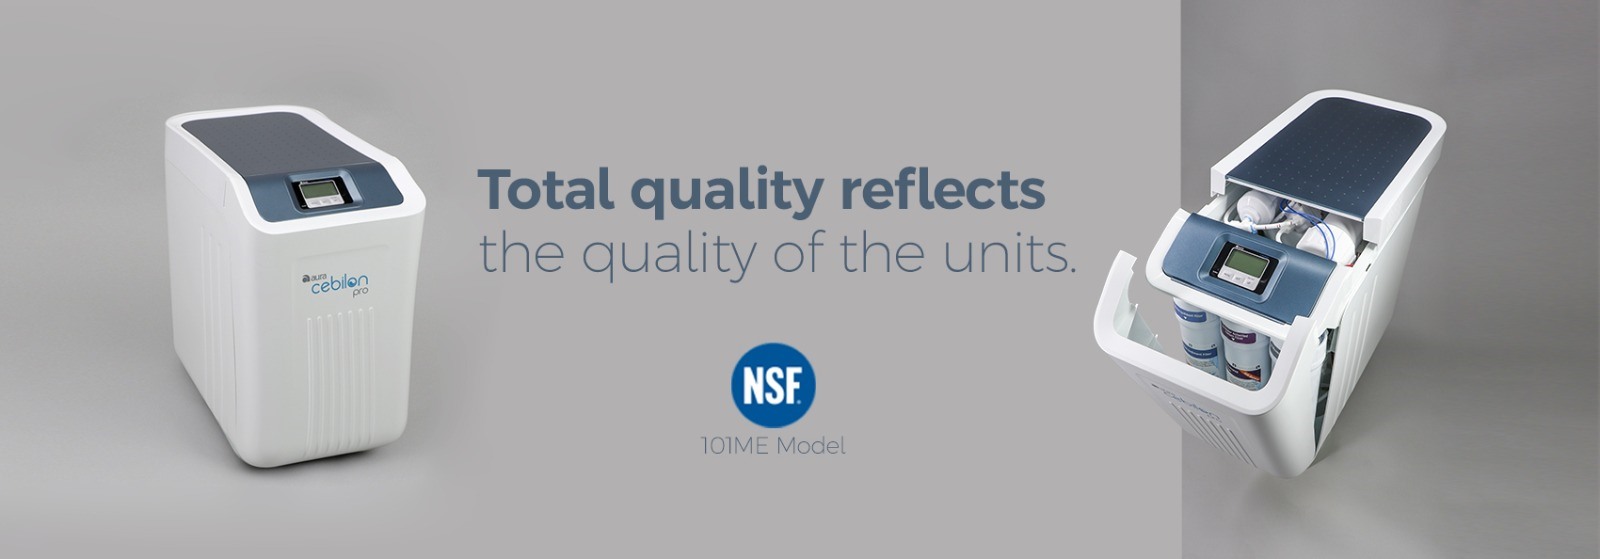 Total quality reflects the quality of the units.